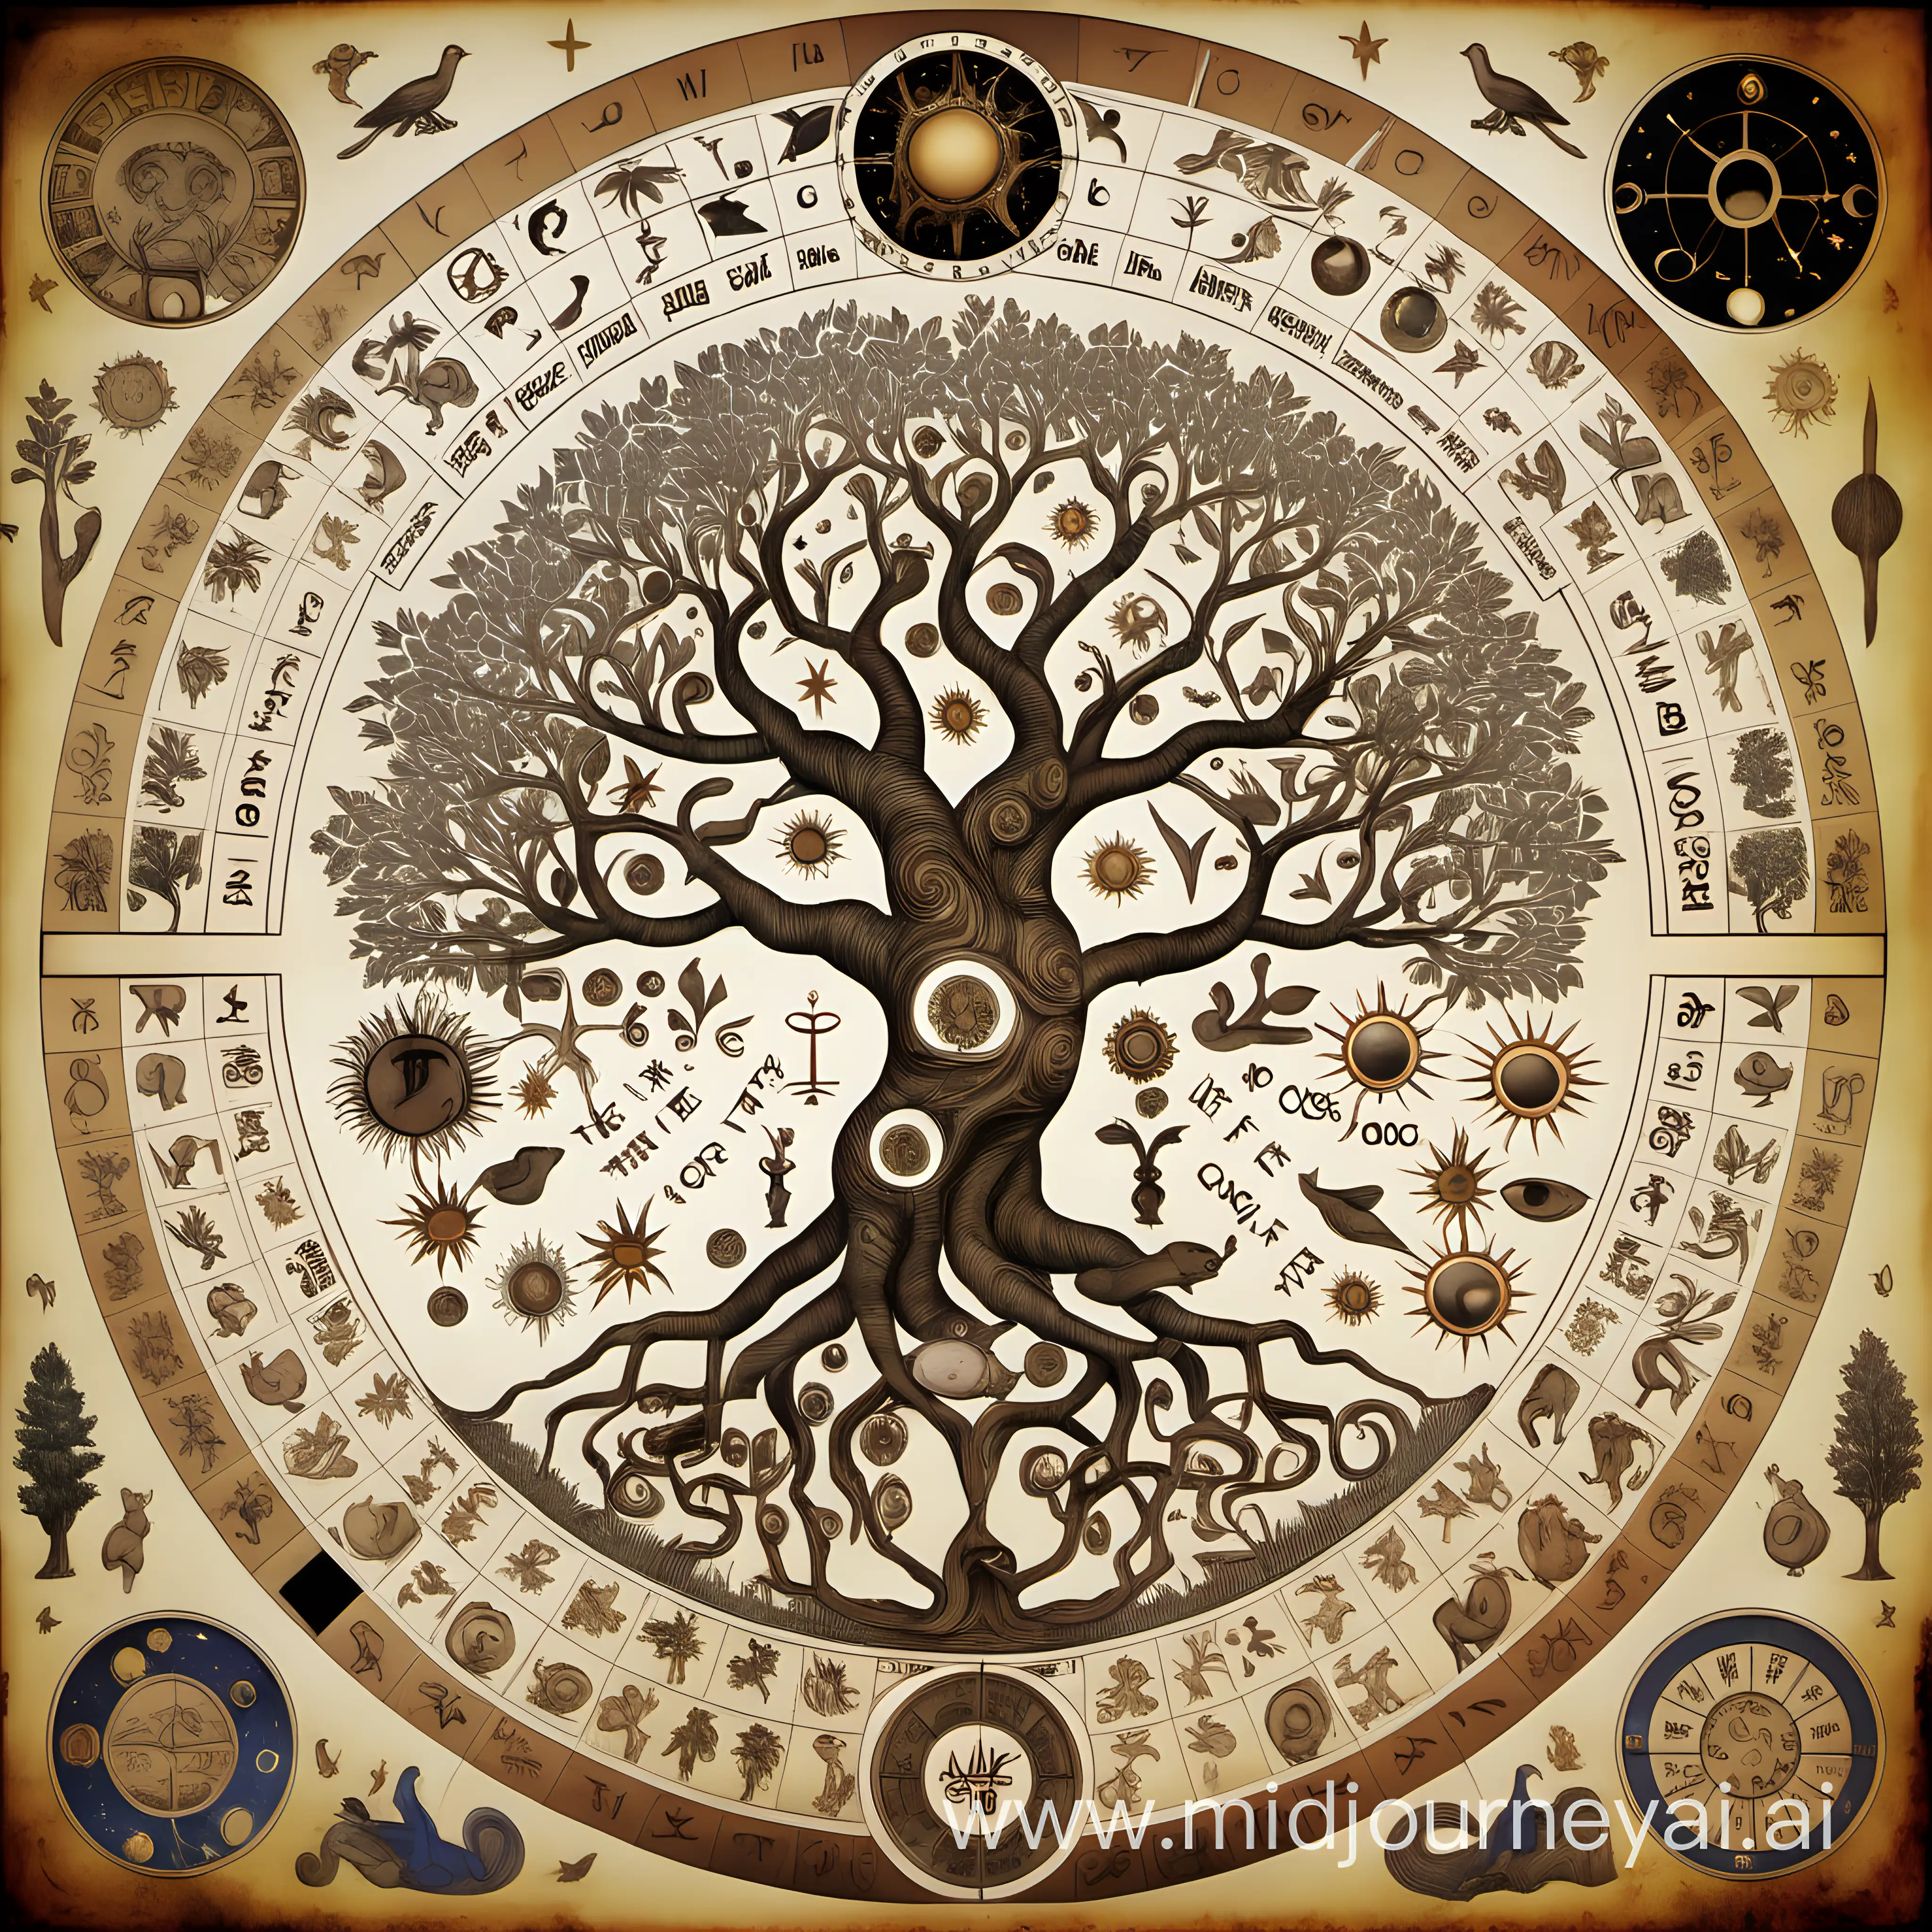 Tree of life with the Zodiac and cosmos